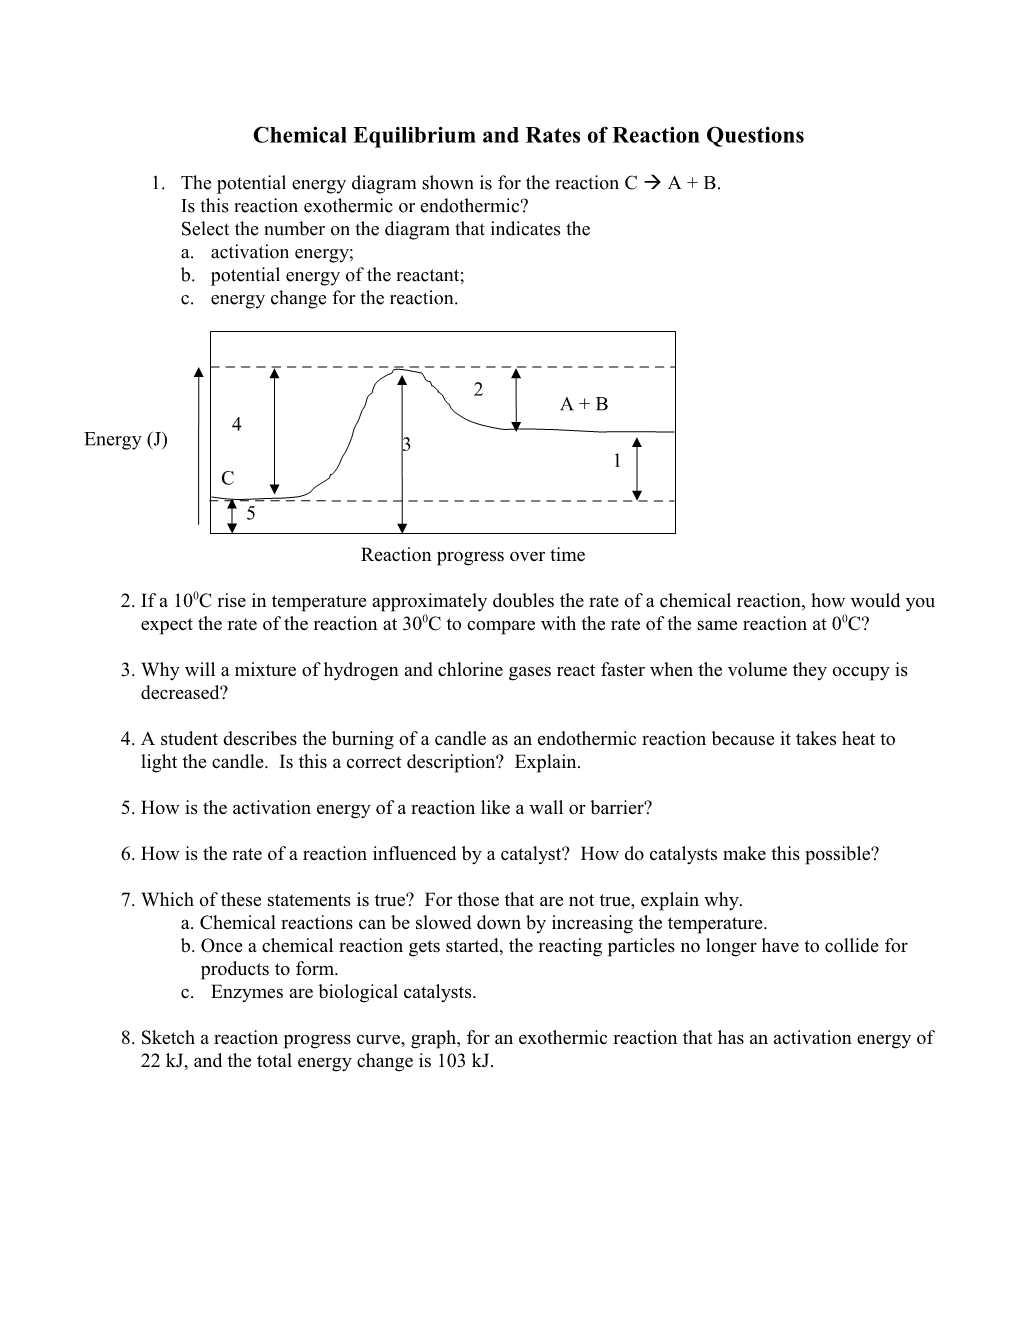 Chemical Equilibrium and Rates of Reaction Questions